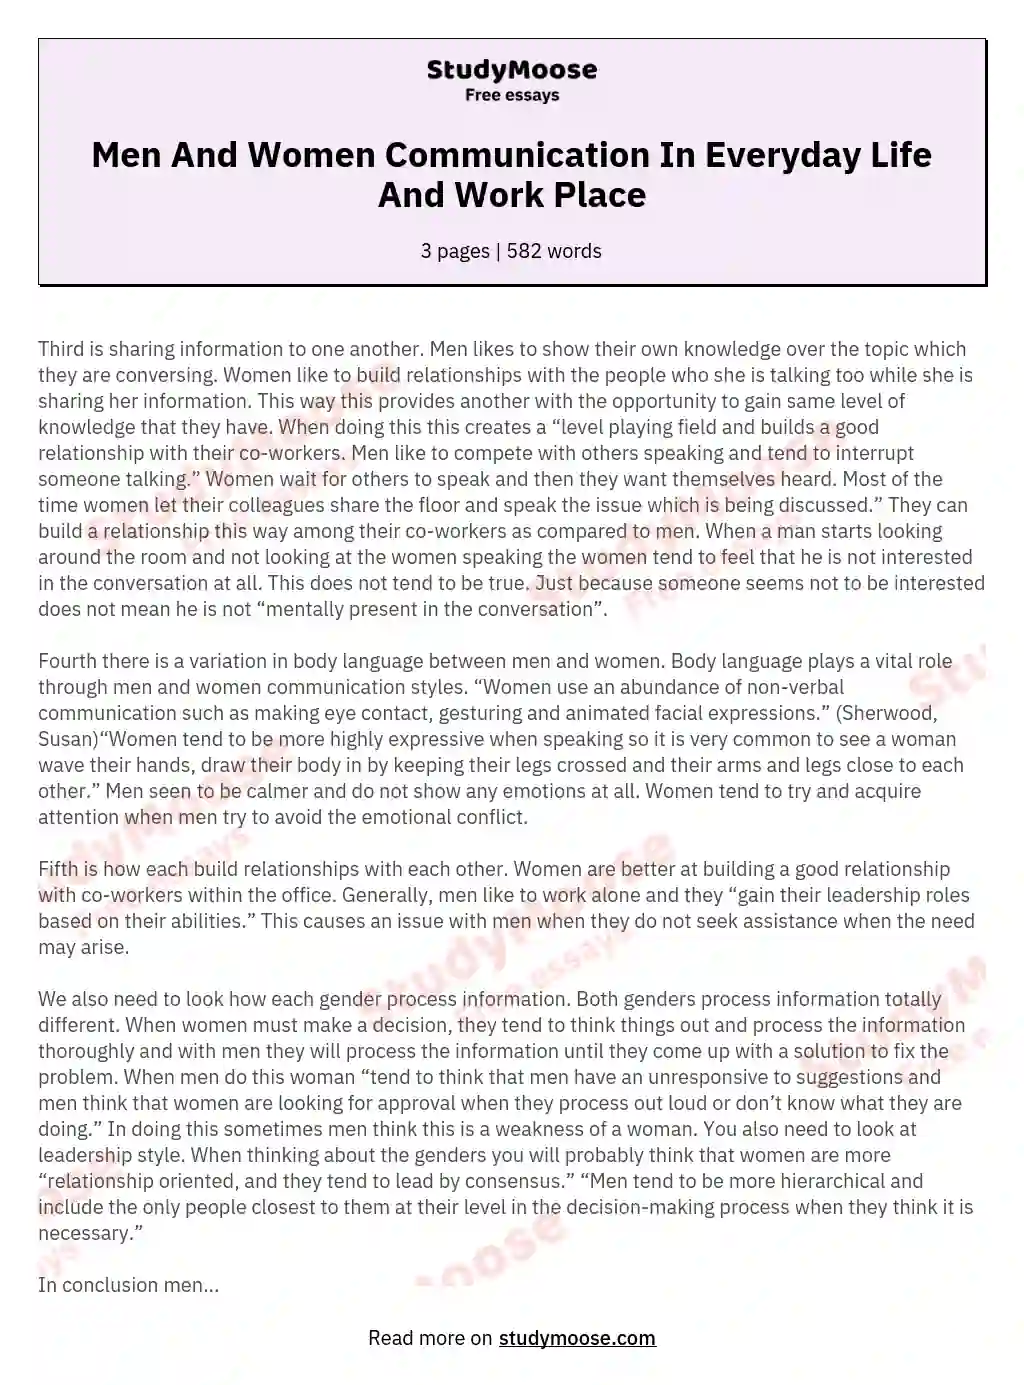 Men And Women Communication In Everyday Life And Work Place essay